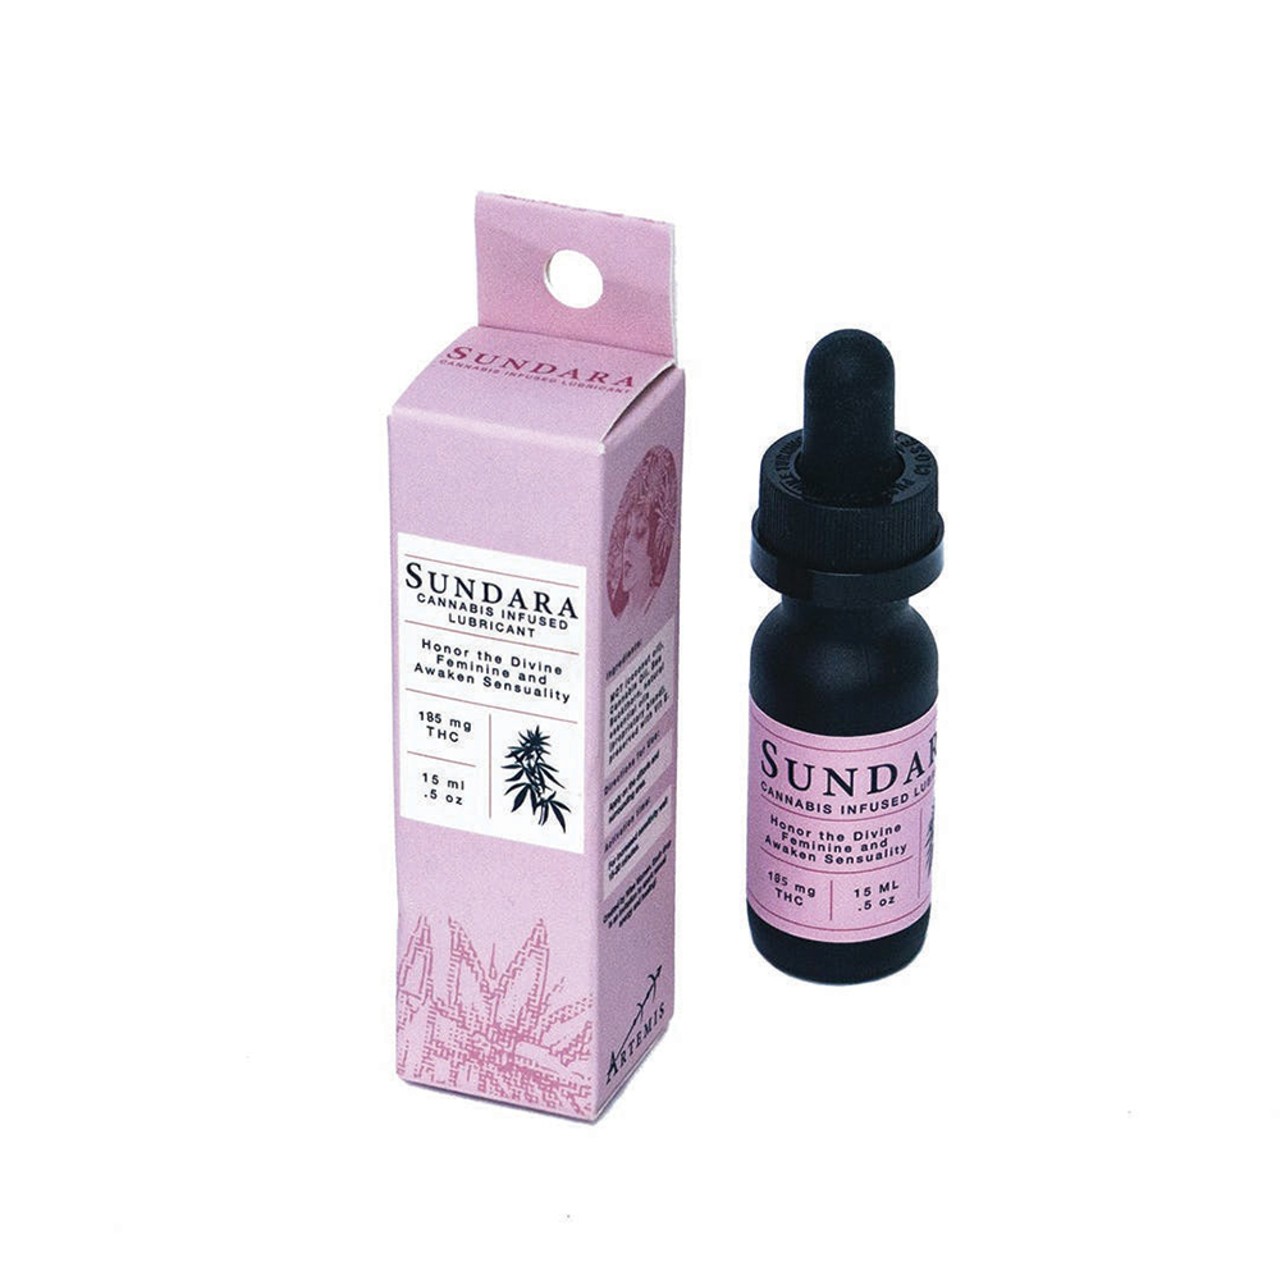 For those who want to get their vaginas &#151;&nbsp;and their orgasms &#151;&nbsp;hella stoned
Sundara THC Infused Lubricant, 15 mg THC, $55
Treehouse 603, 603 E. William St., Ann Arbor; 734-773-3895; treehouse603.com
Vaginas are cool. But you know what&#146;s cooler than a vagina? A vagina on weed, man. OK,&nbsp;so you might already know this, but your lady bits can&#146;t get, like, high, but you can boost arousal and increase moisture for pleasure fun time. What&#146;s wrong with us? Well, we&#146;re not quite sure, but this Sundara THC-infused lube can help increase blood flow to the clitoris and/or vulva, while also relieving any friction-based discomfort during intercourse. The lightly scented formula made with all-natural oils is safe and healing and has been shown to relieve symptoms for women with endometriosis and/or uterine fibroids.